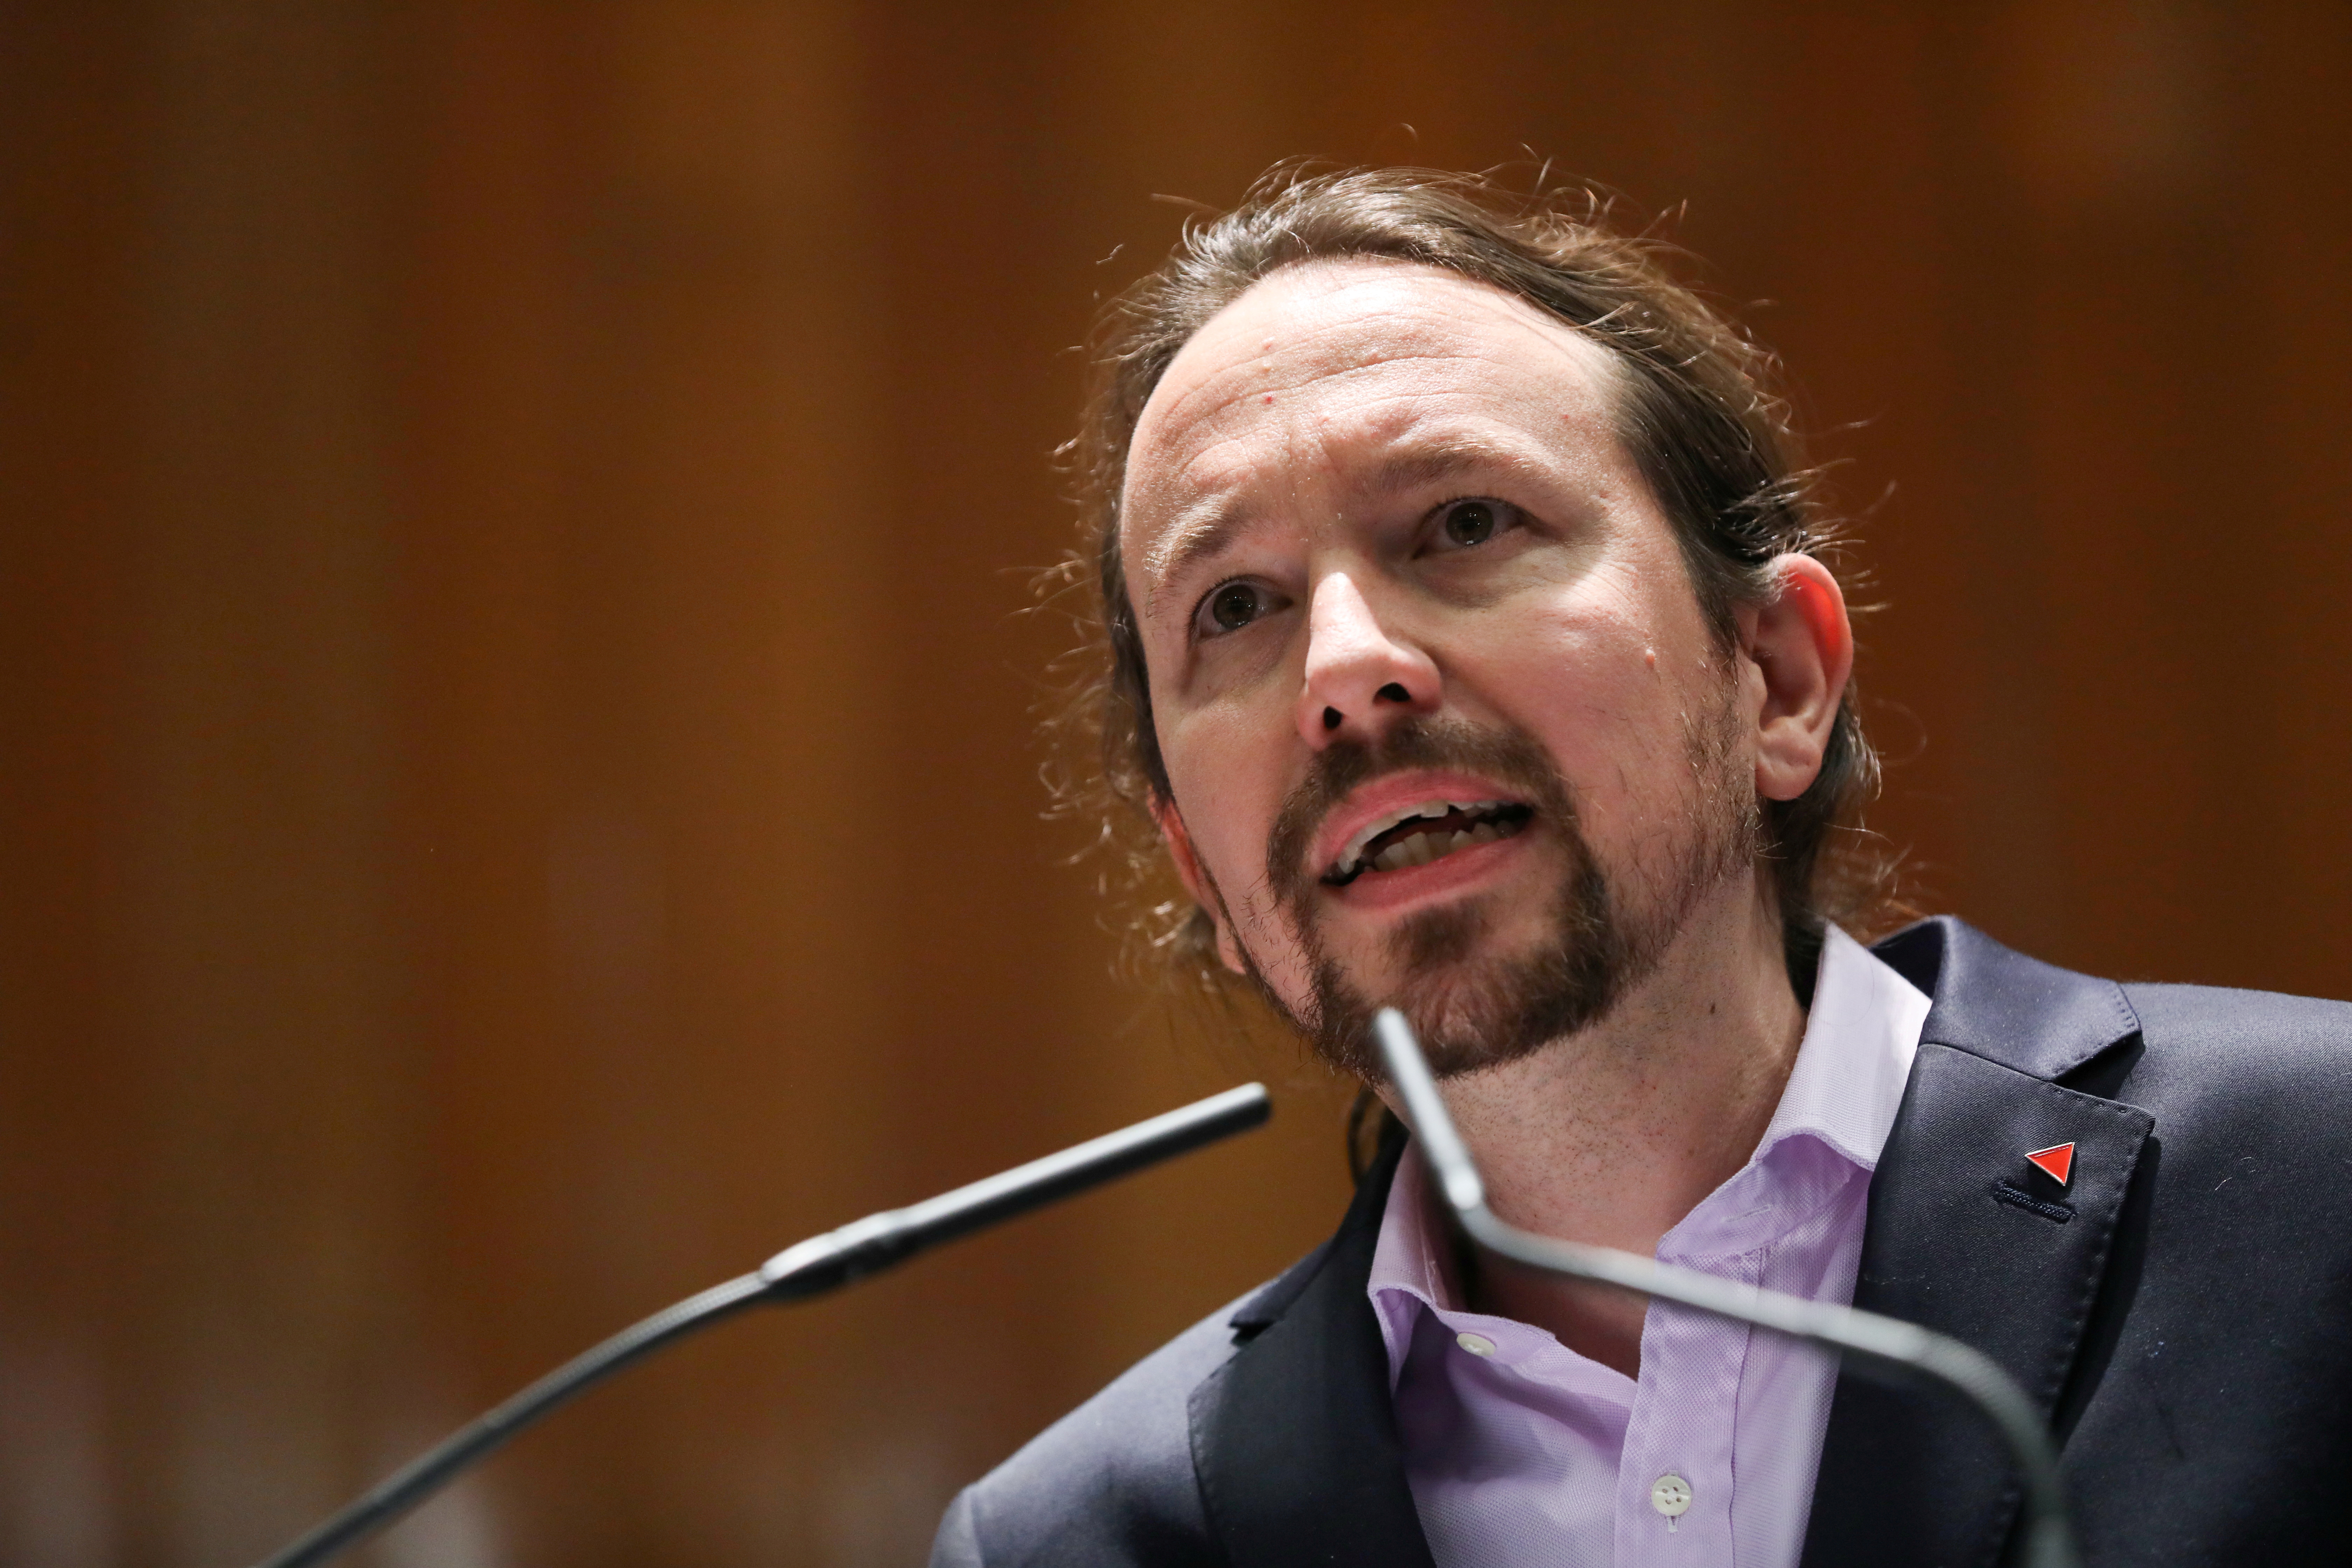 Yes he can!' How Spanish indignado Pablo Iglesias aims to use a wave of  protest to build 'a decent country', Spain